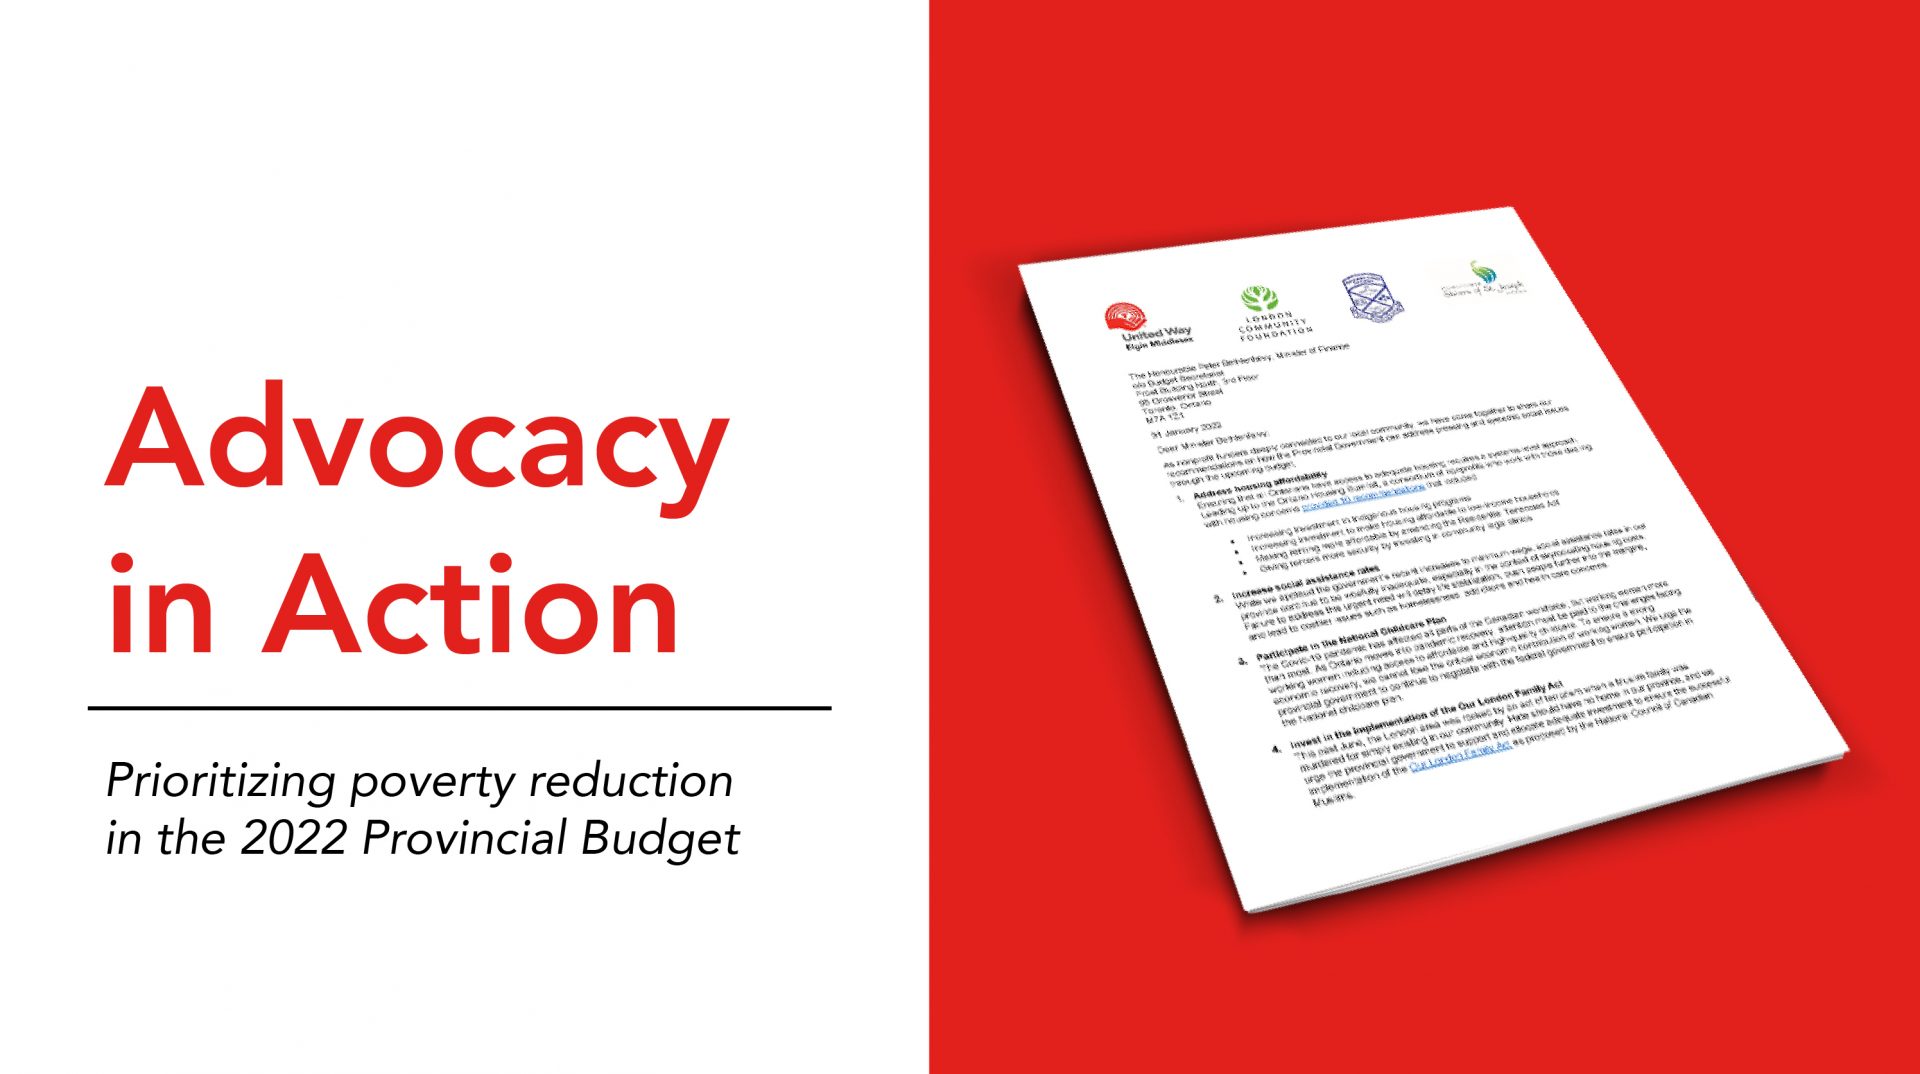 Advocacy in Action. Prioritizing poverty reduction in the 2022 Provincial Budget